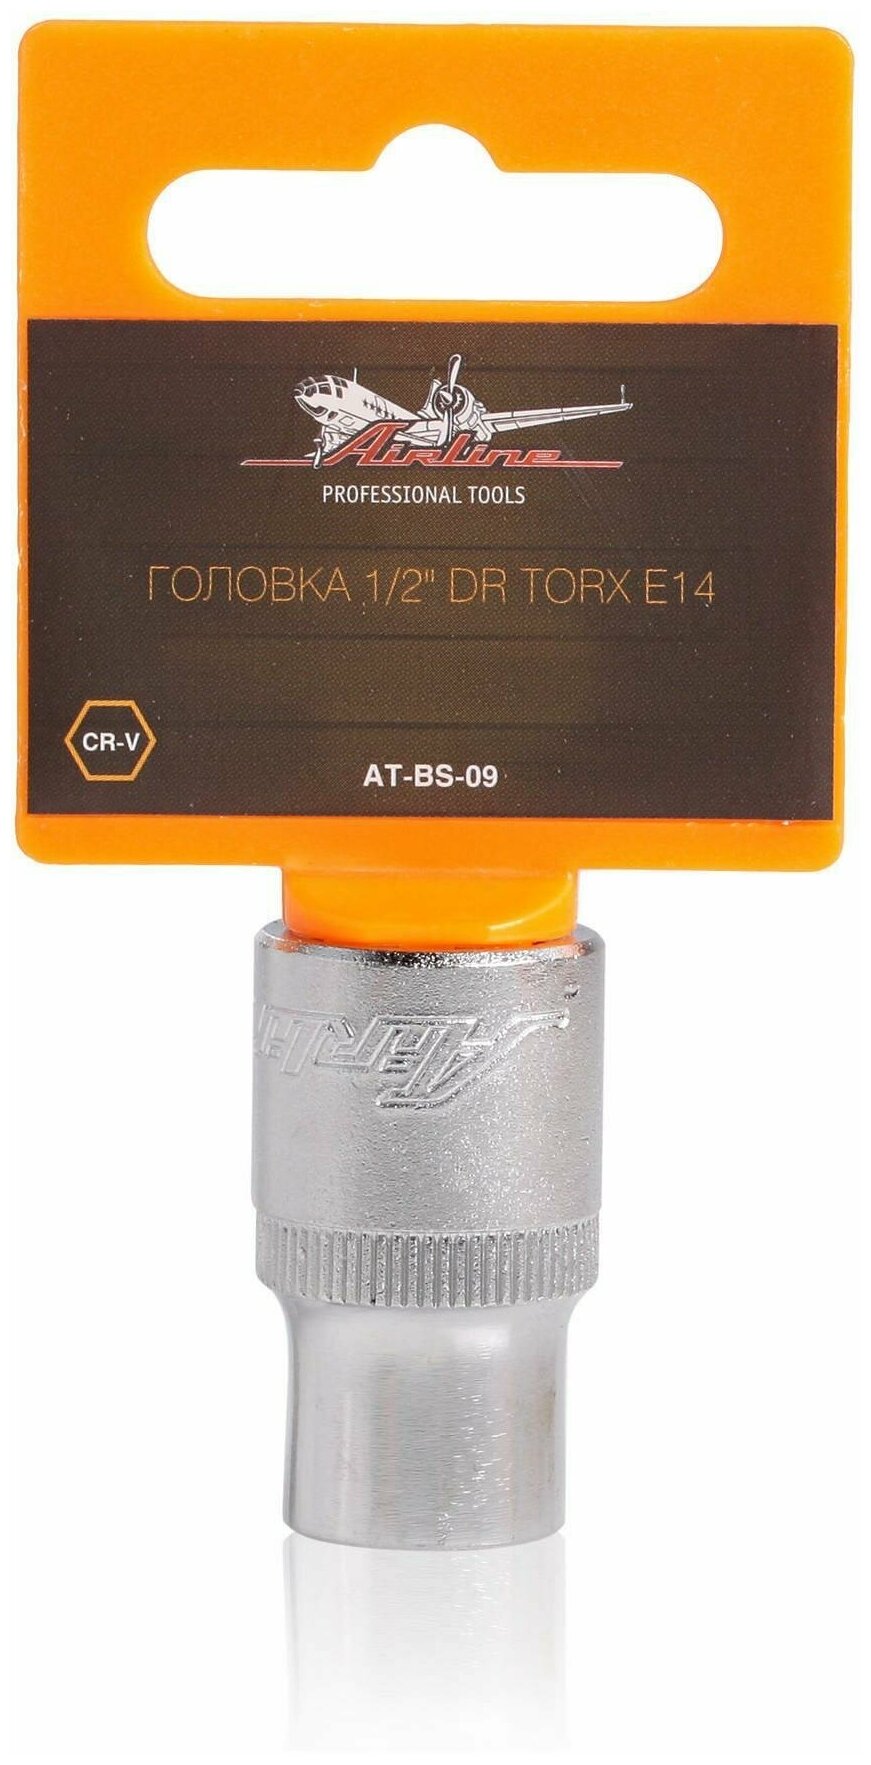 Головка 1/2" DR TORX E14 AT-BS-09 AIRLINE